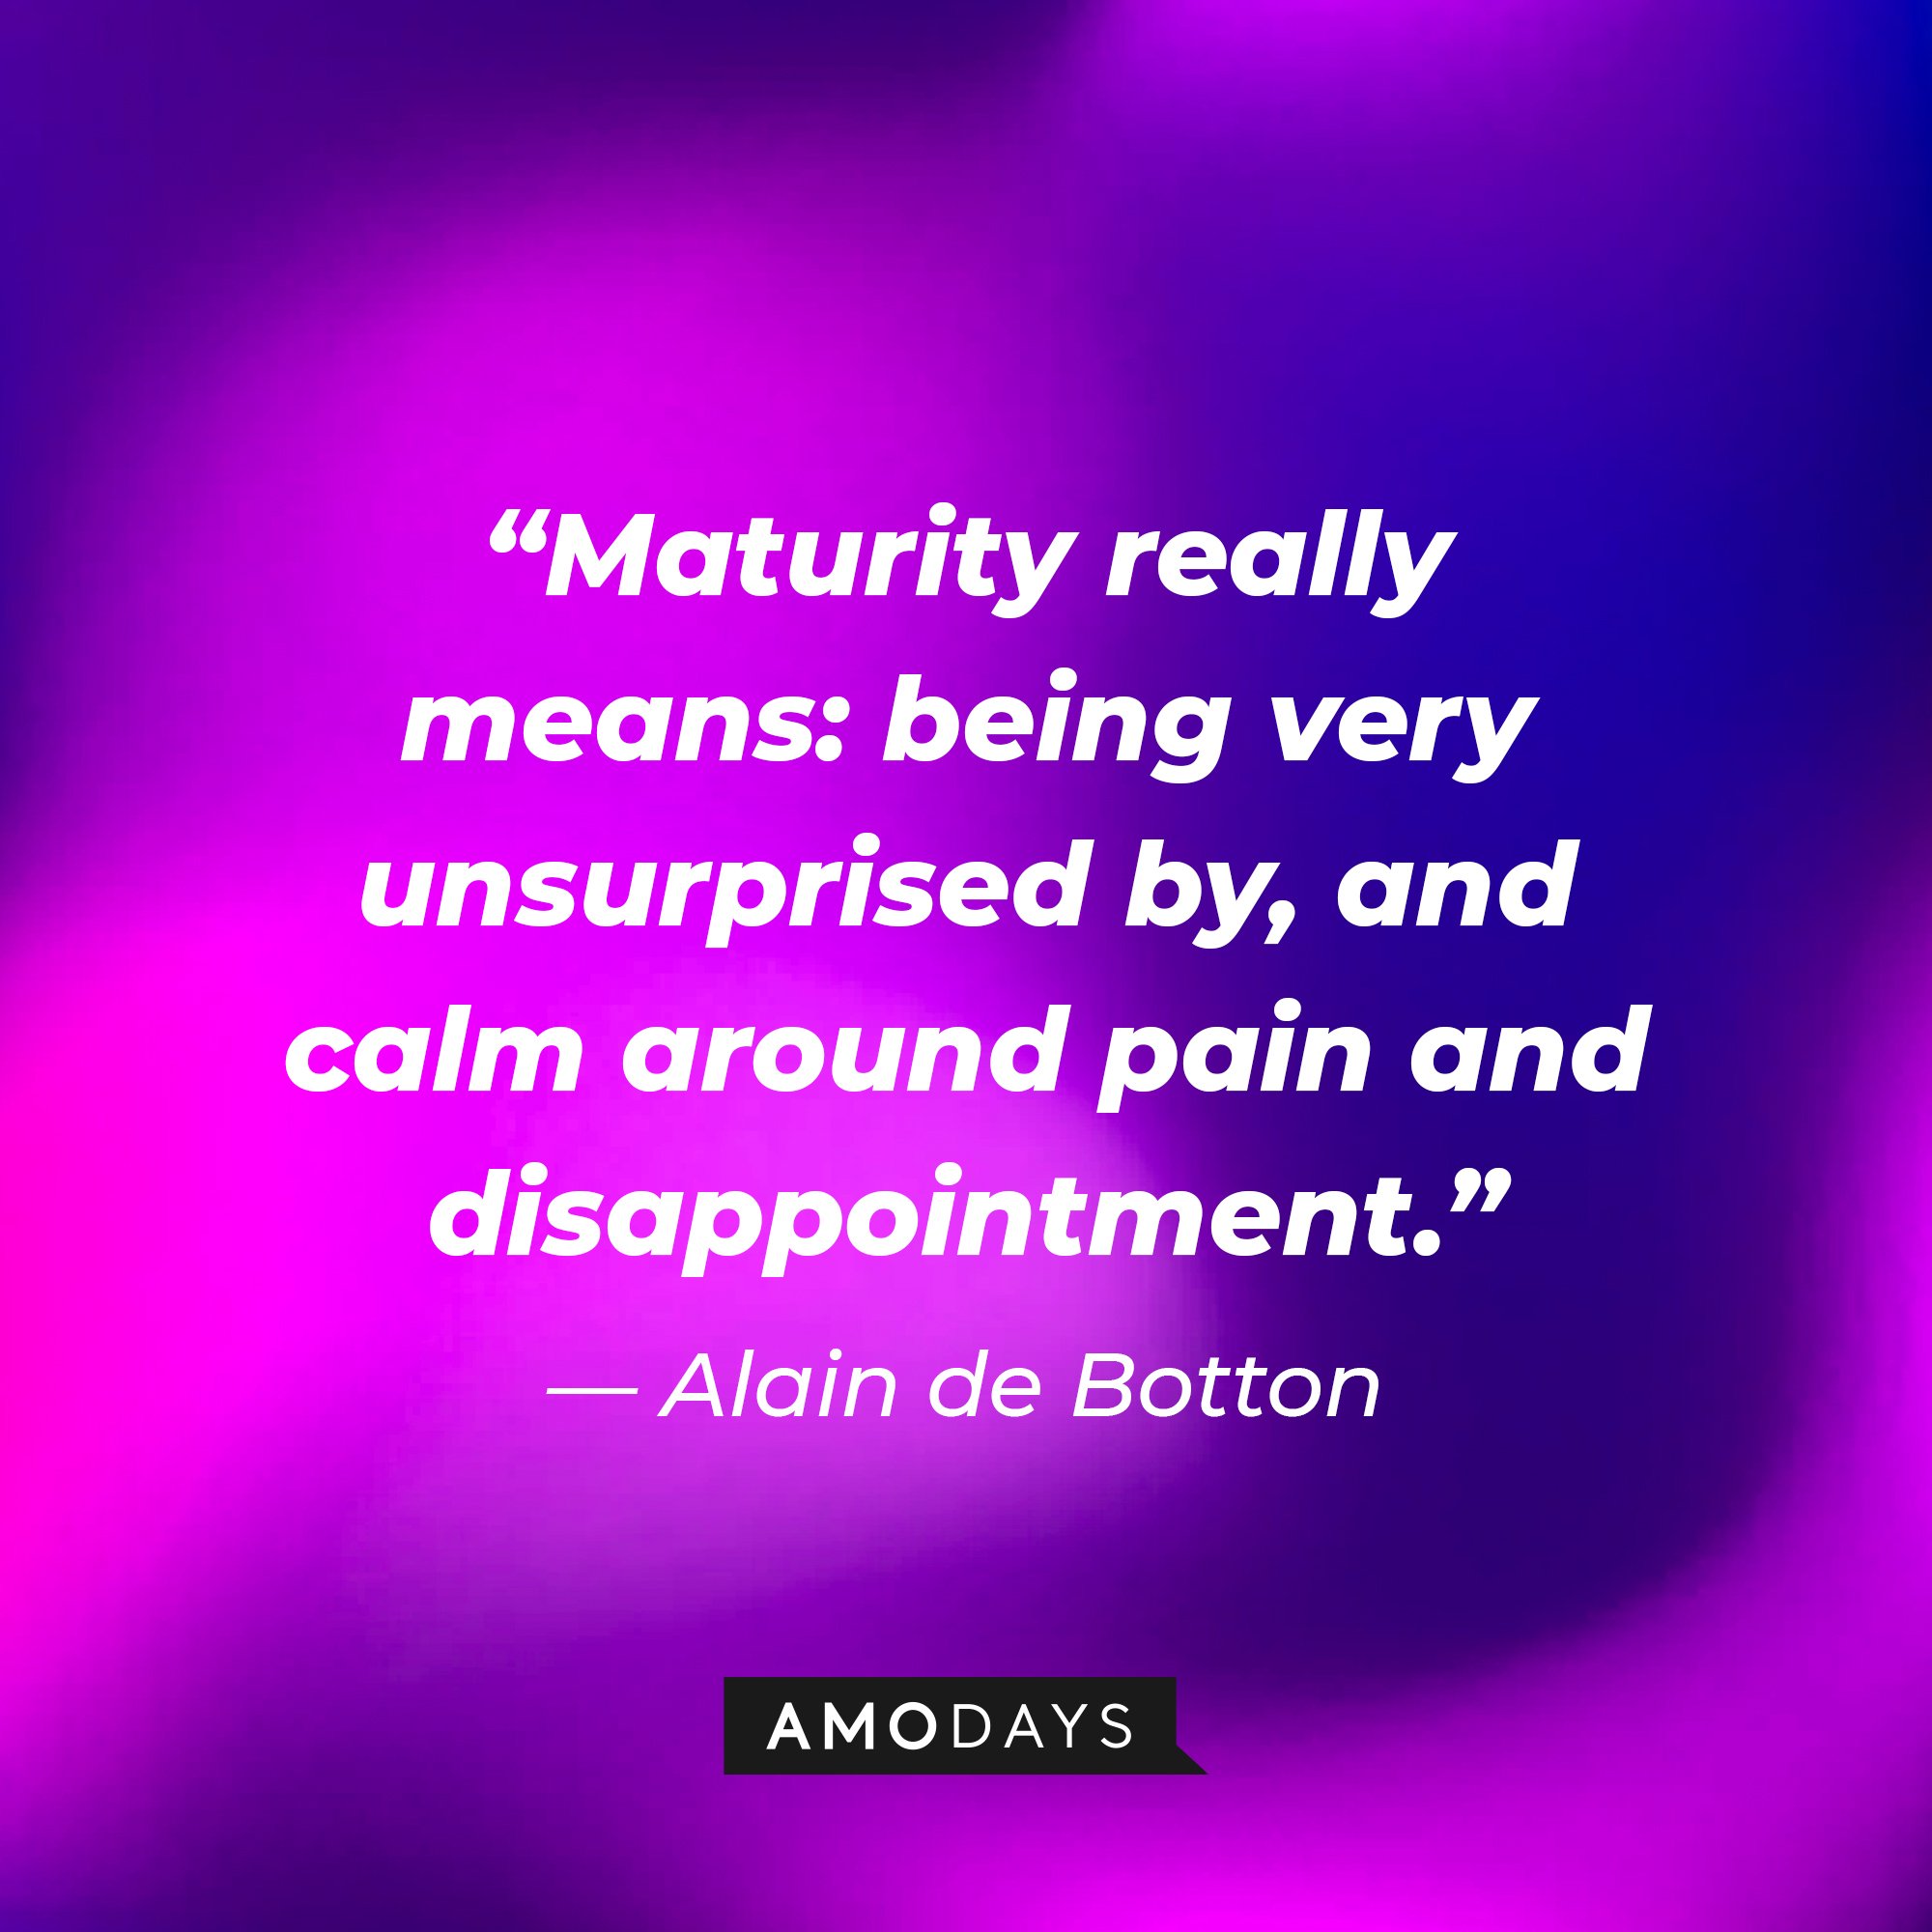 Alain de Botton's quote: “Maturity really means: being very unsurprised by, and calm around pain and disappointment.” | Image: AmoDays